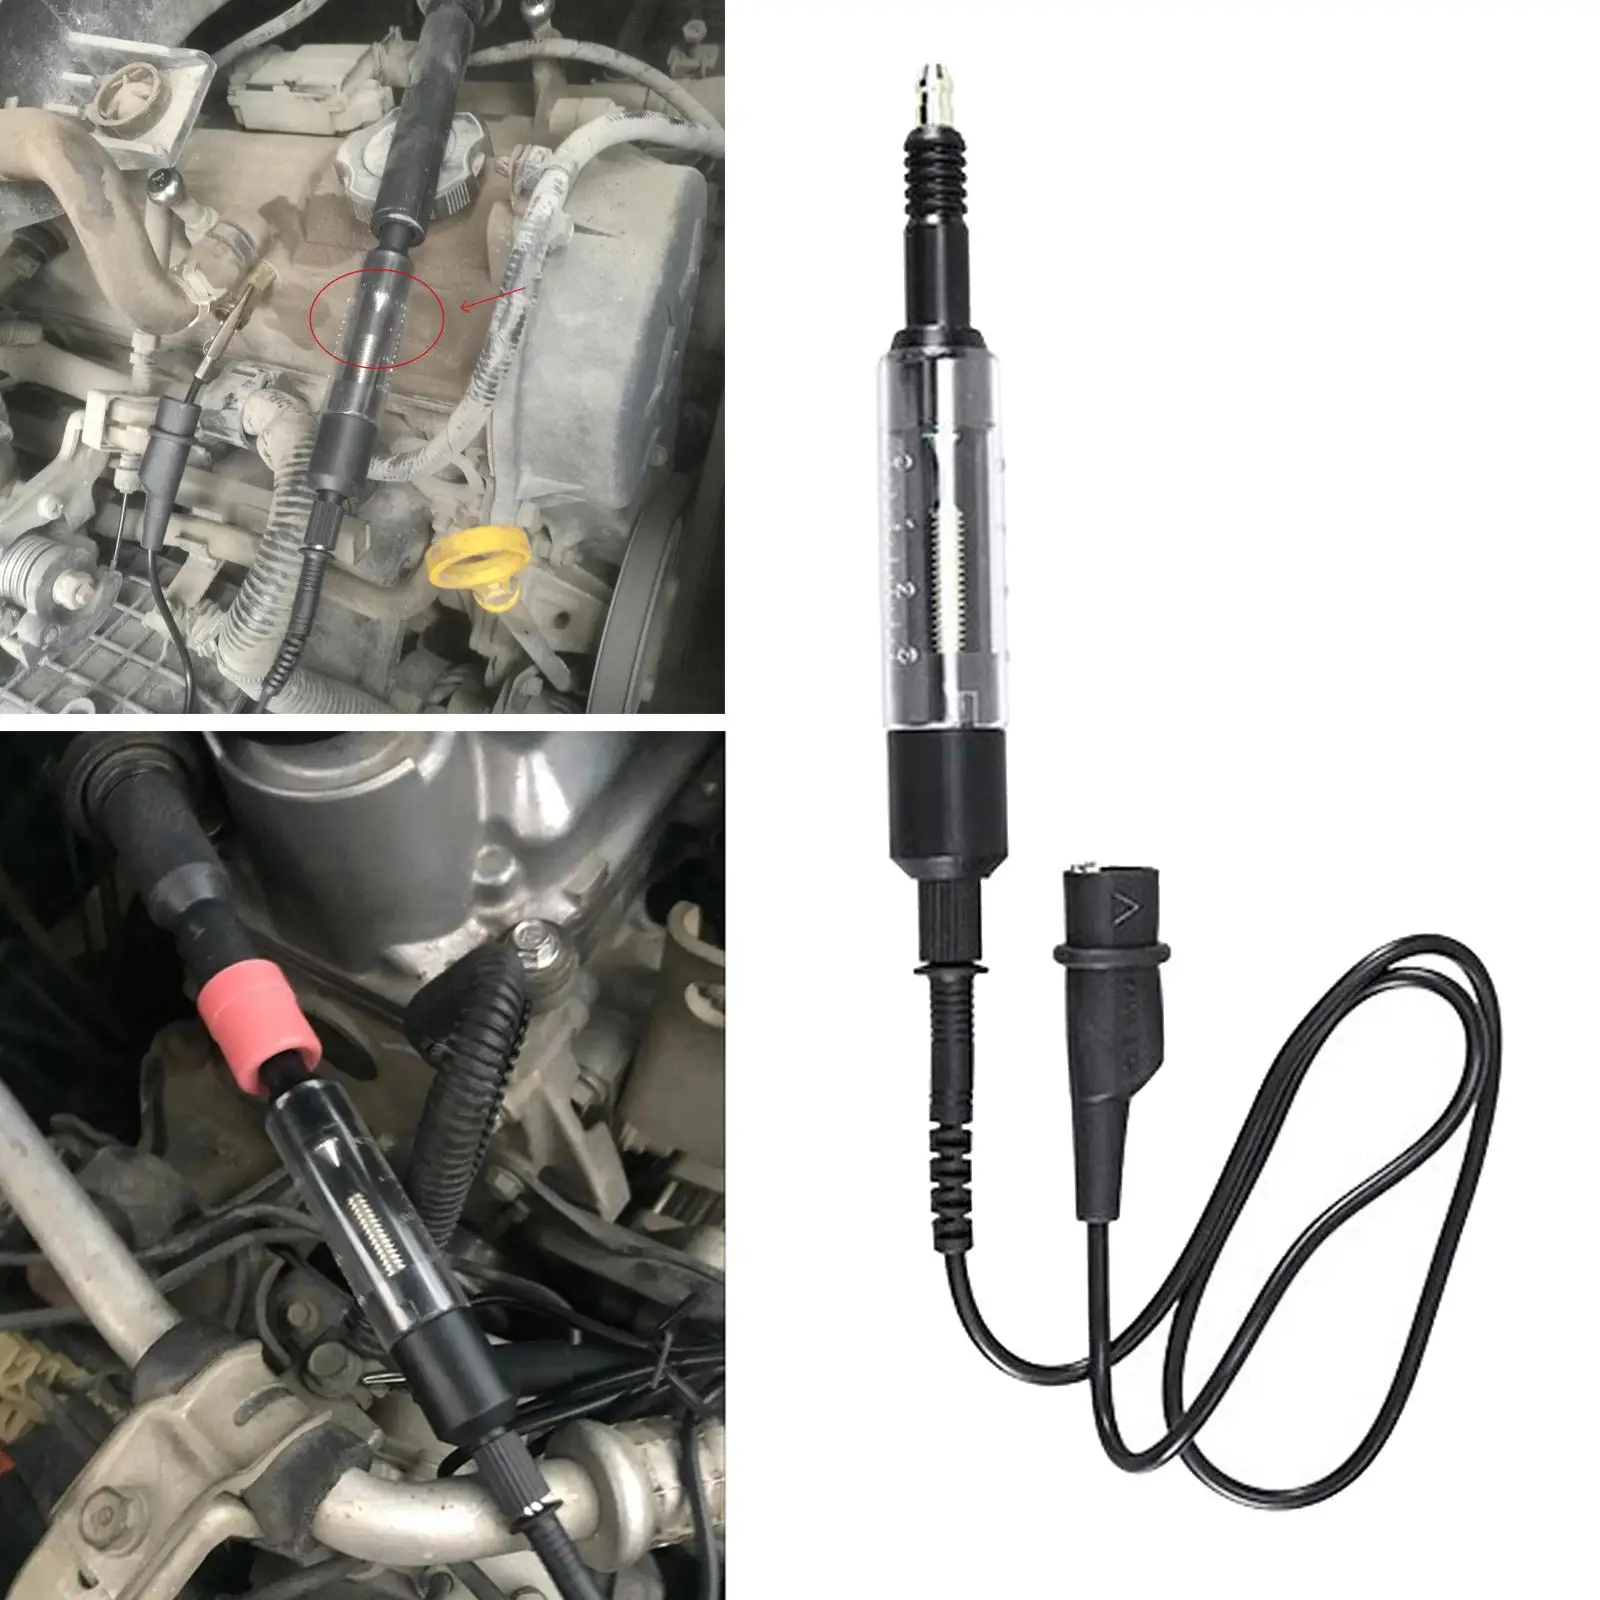 Spark Plug , Ignition Coil   Fixing  Internal/External Engines